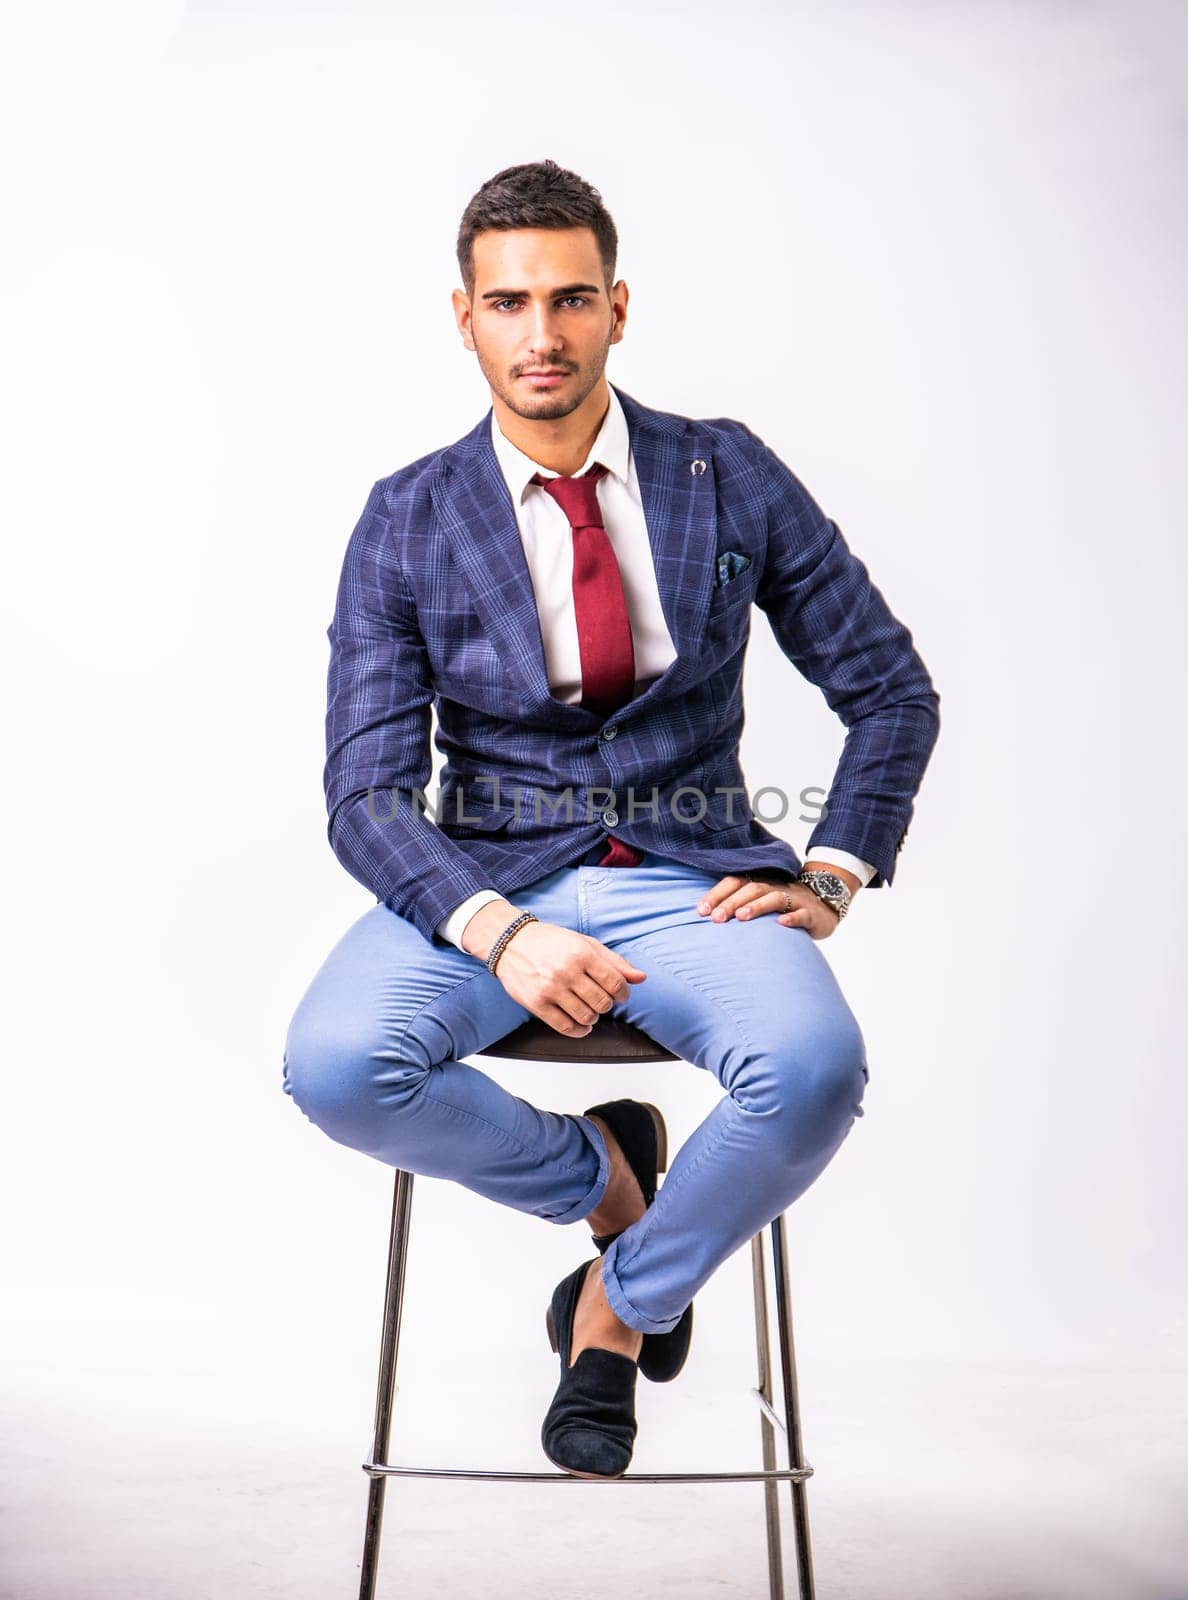 Handsome young man in blue business jacket and jeans posing on white background in studio, sitting on stool. Full body shot. Looking at camera